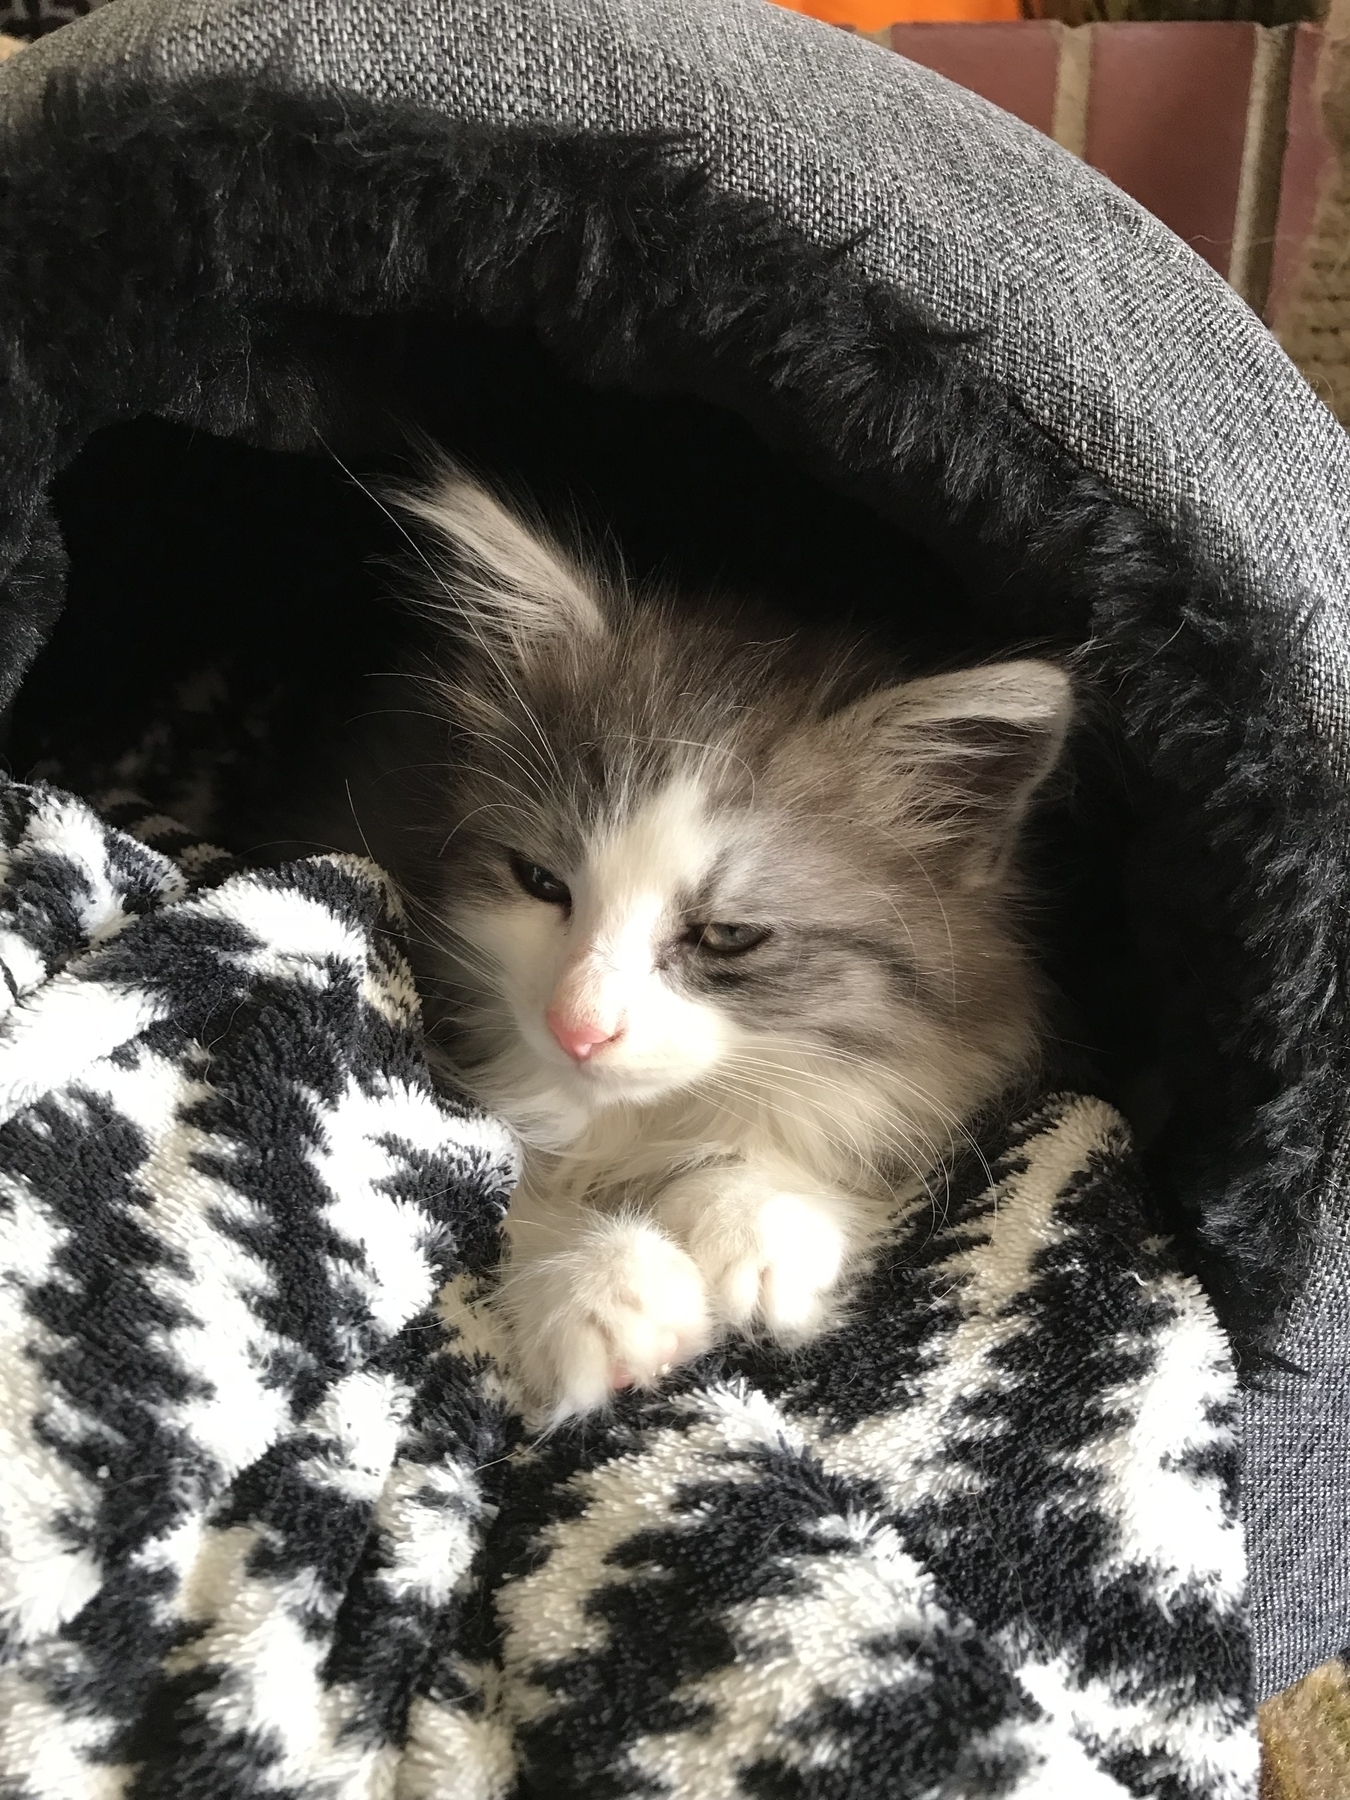 A fluffy gray and white kitten named Priss laying on a blanket in a little cat bed.